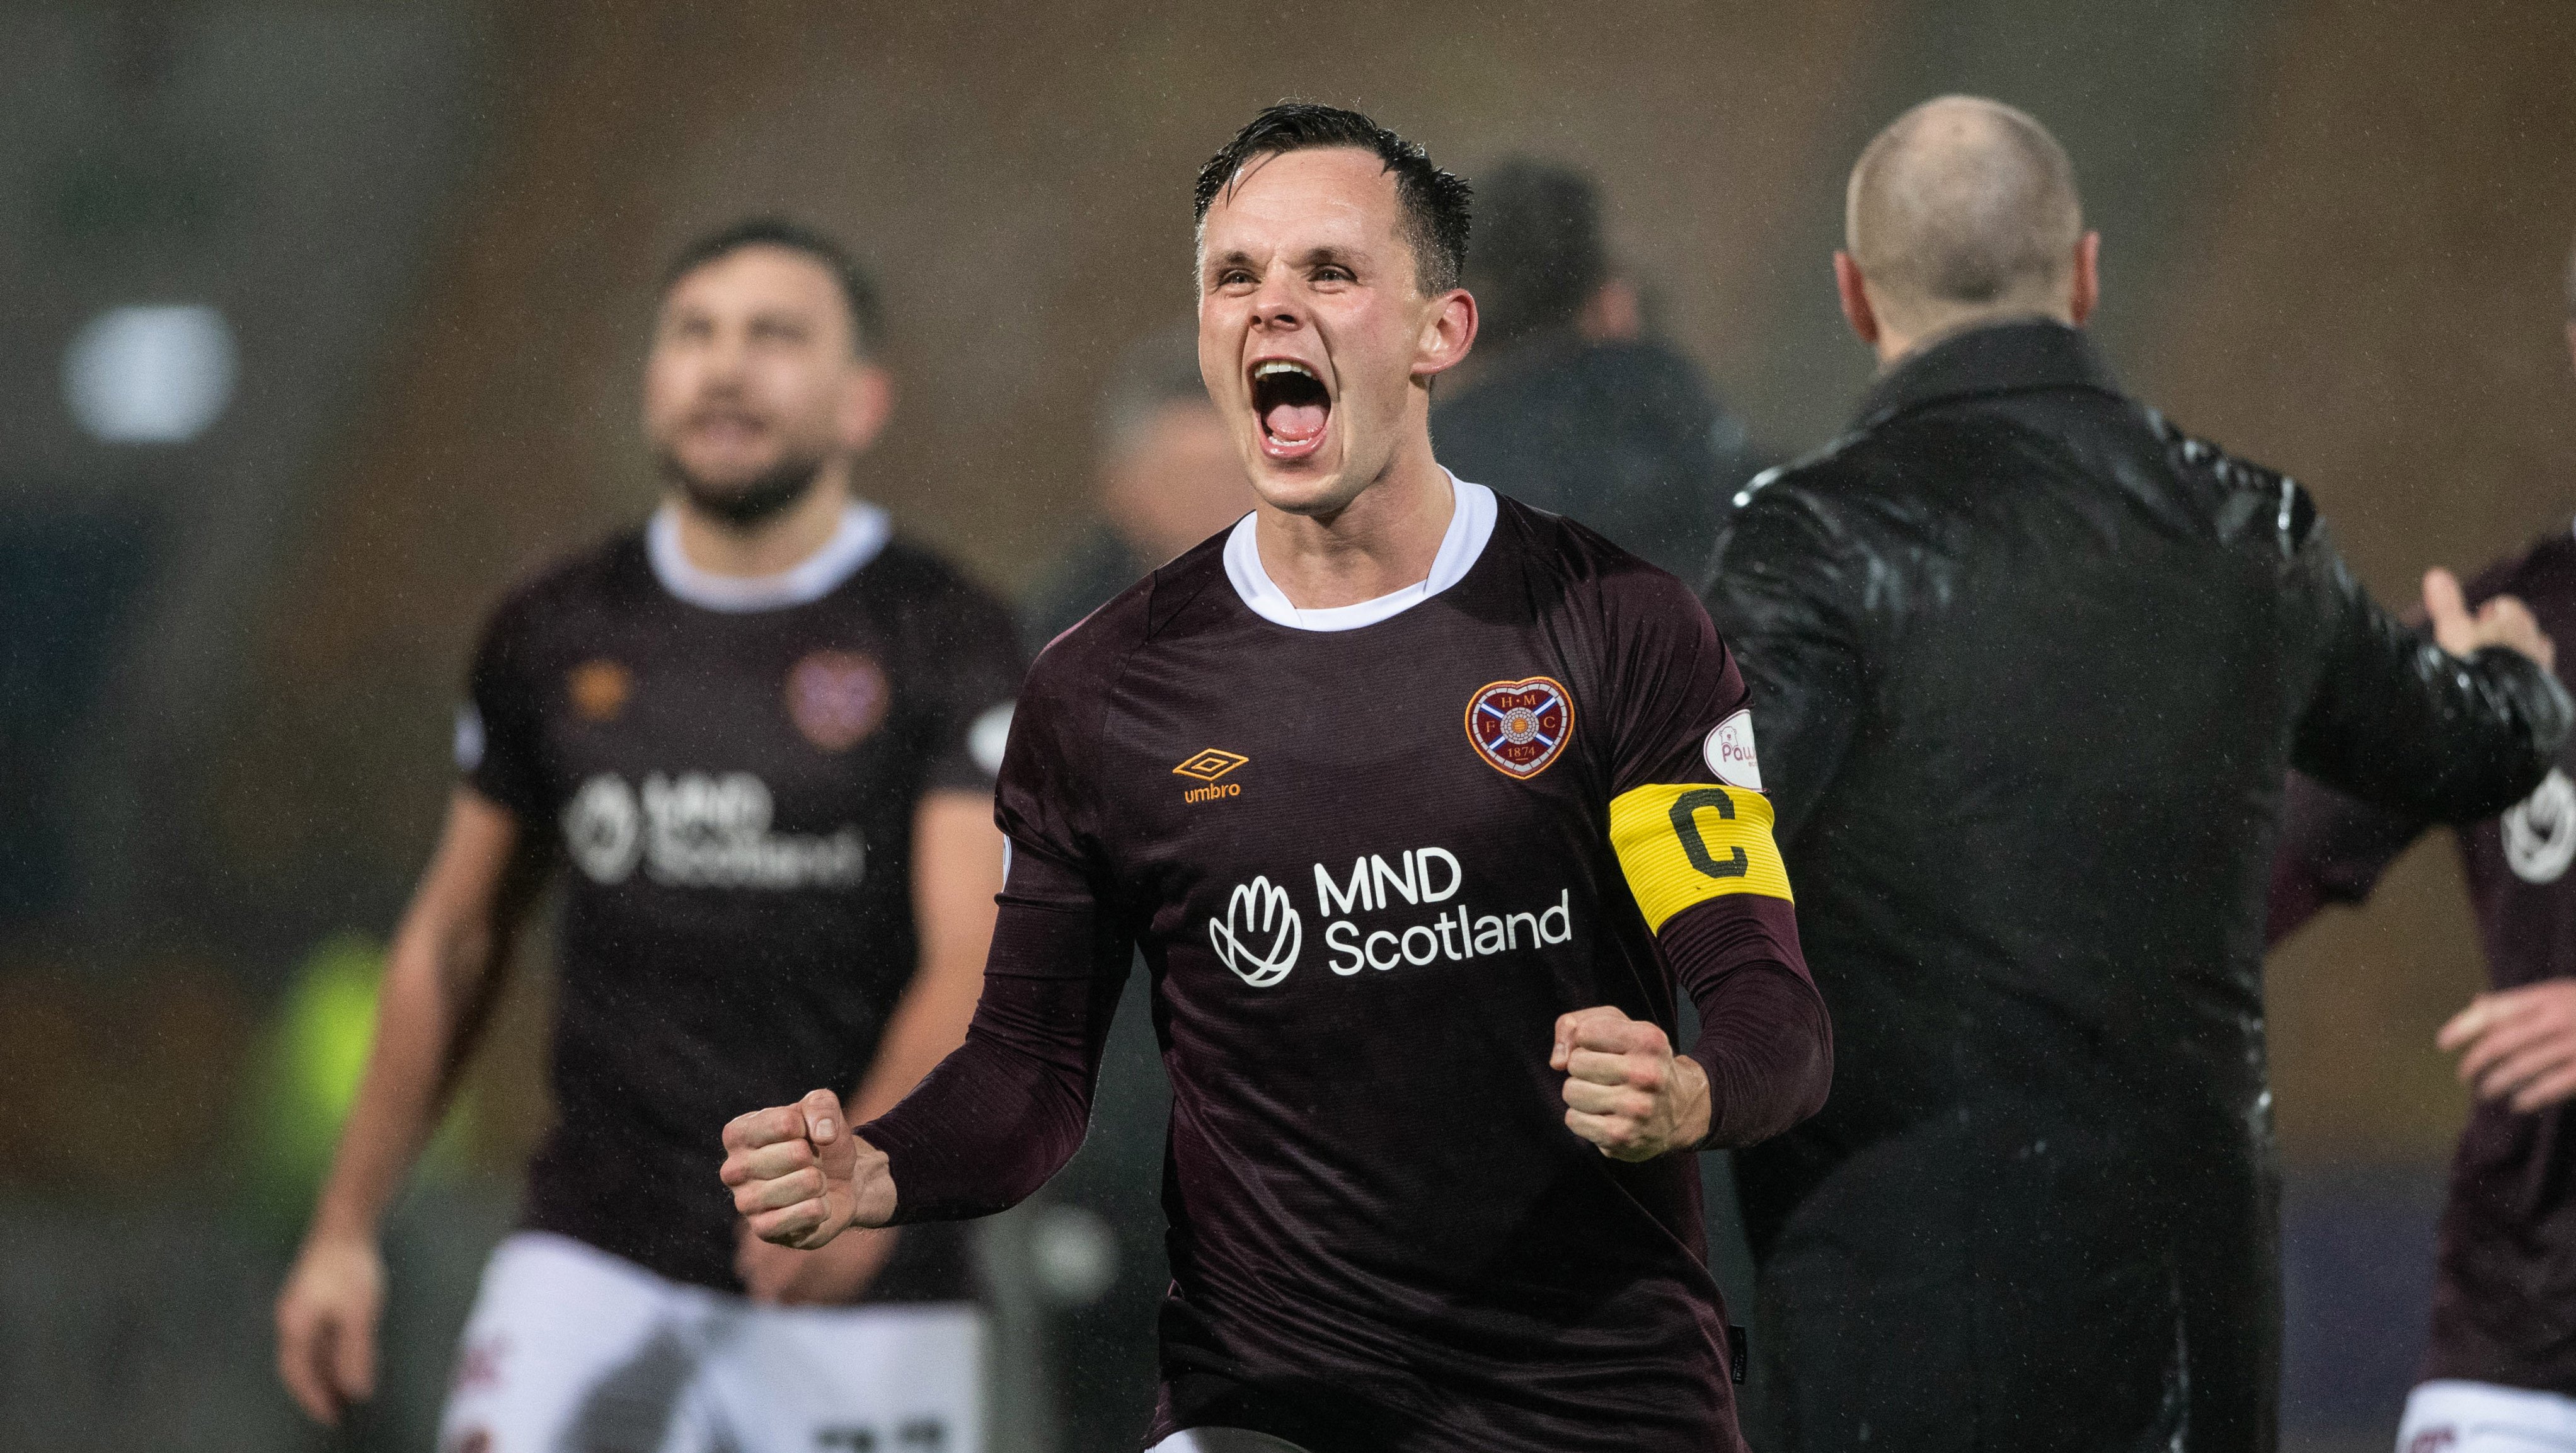 Lawrence Shankland is hoping to receive a call for Euro qualifiers.